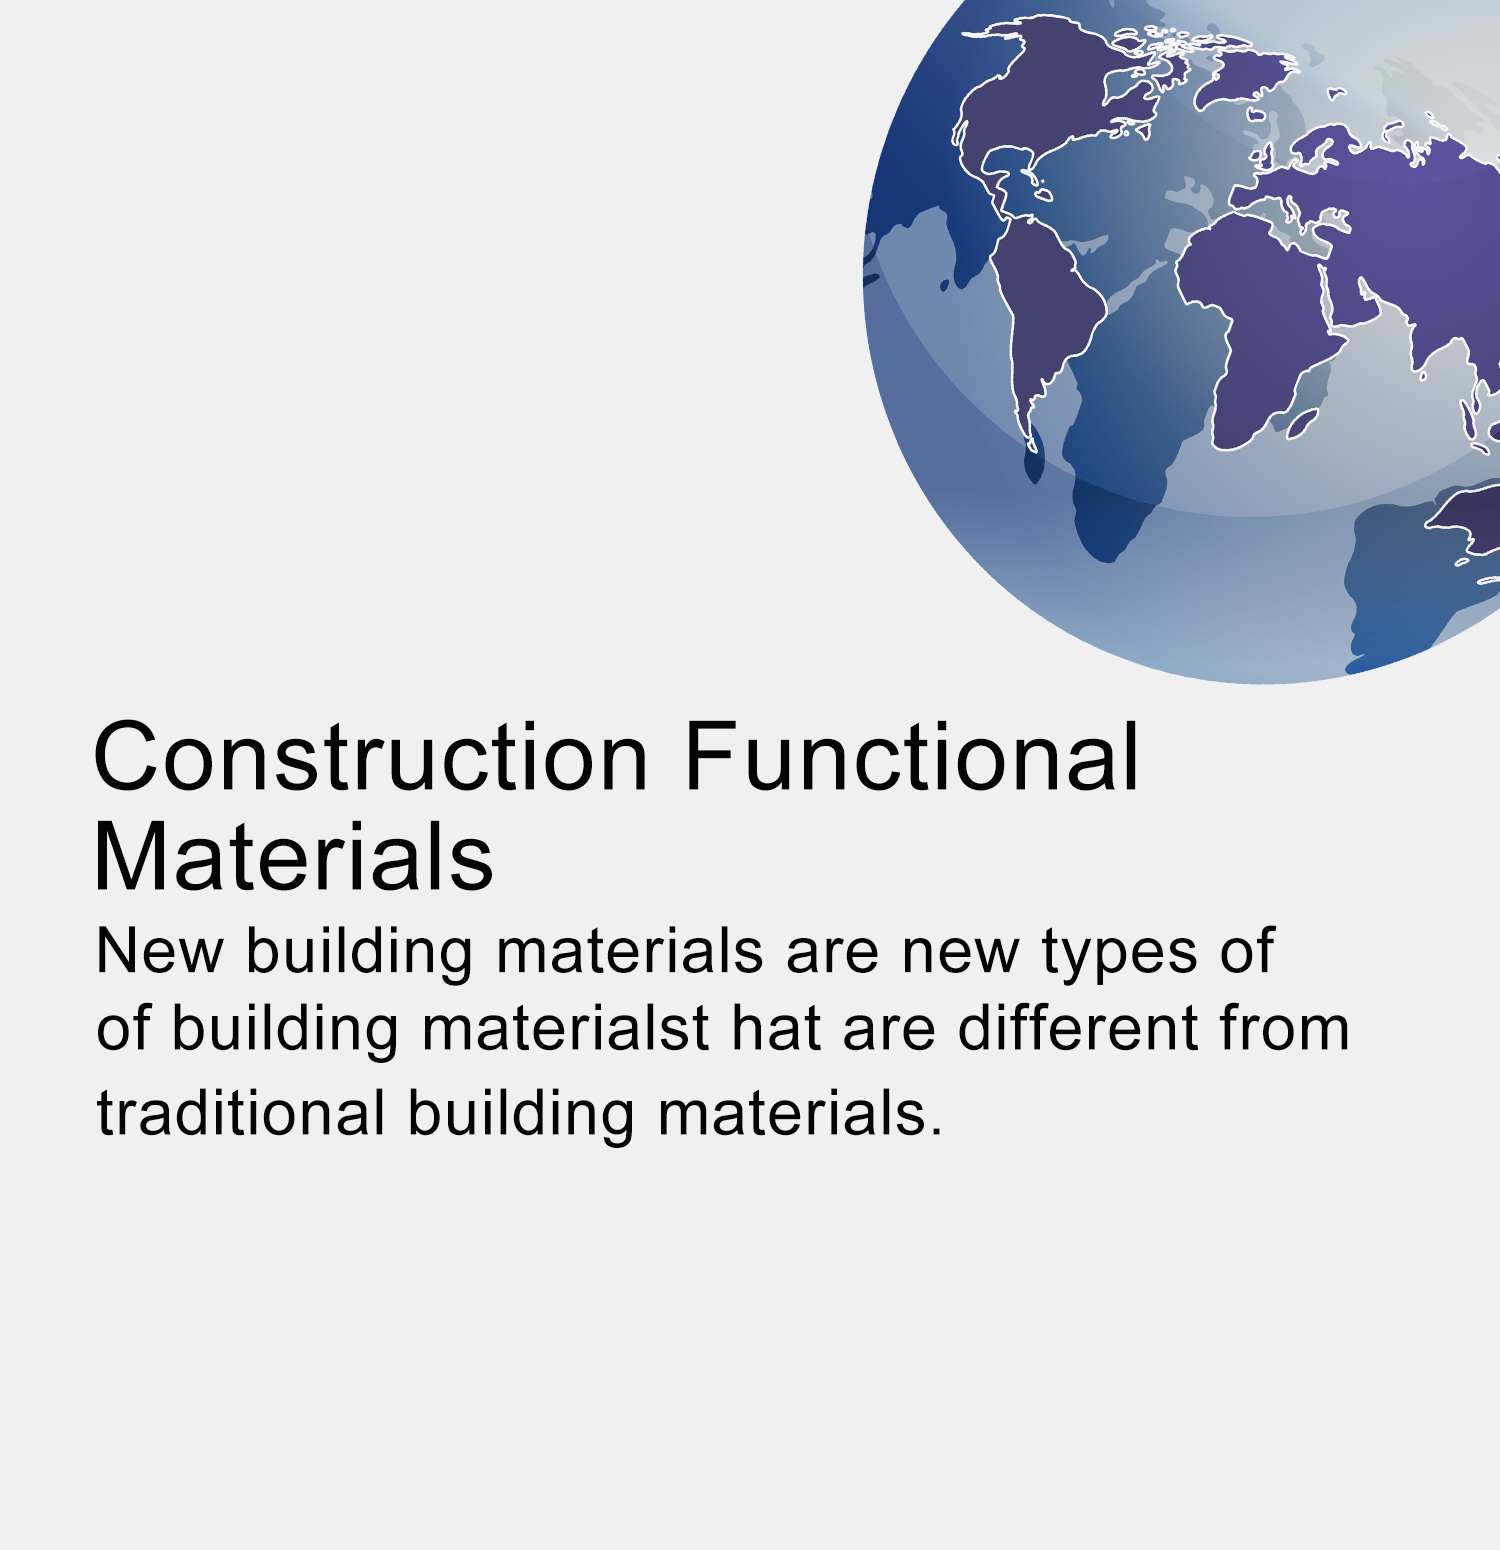 Construction Functional Materials